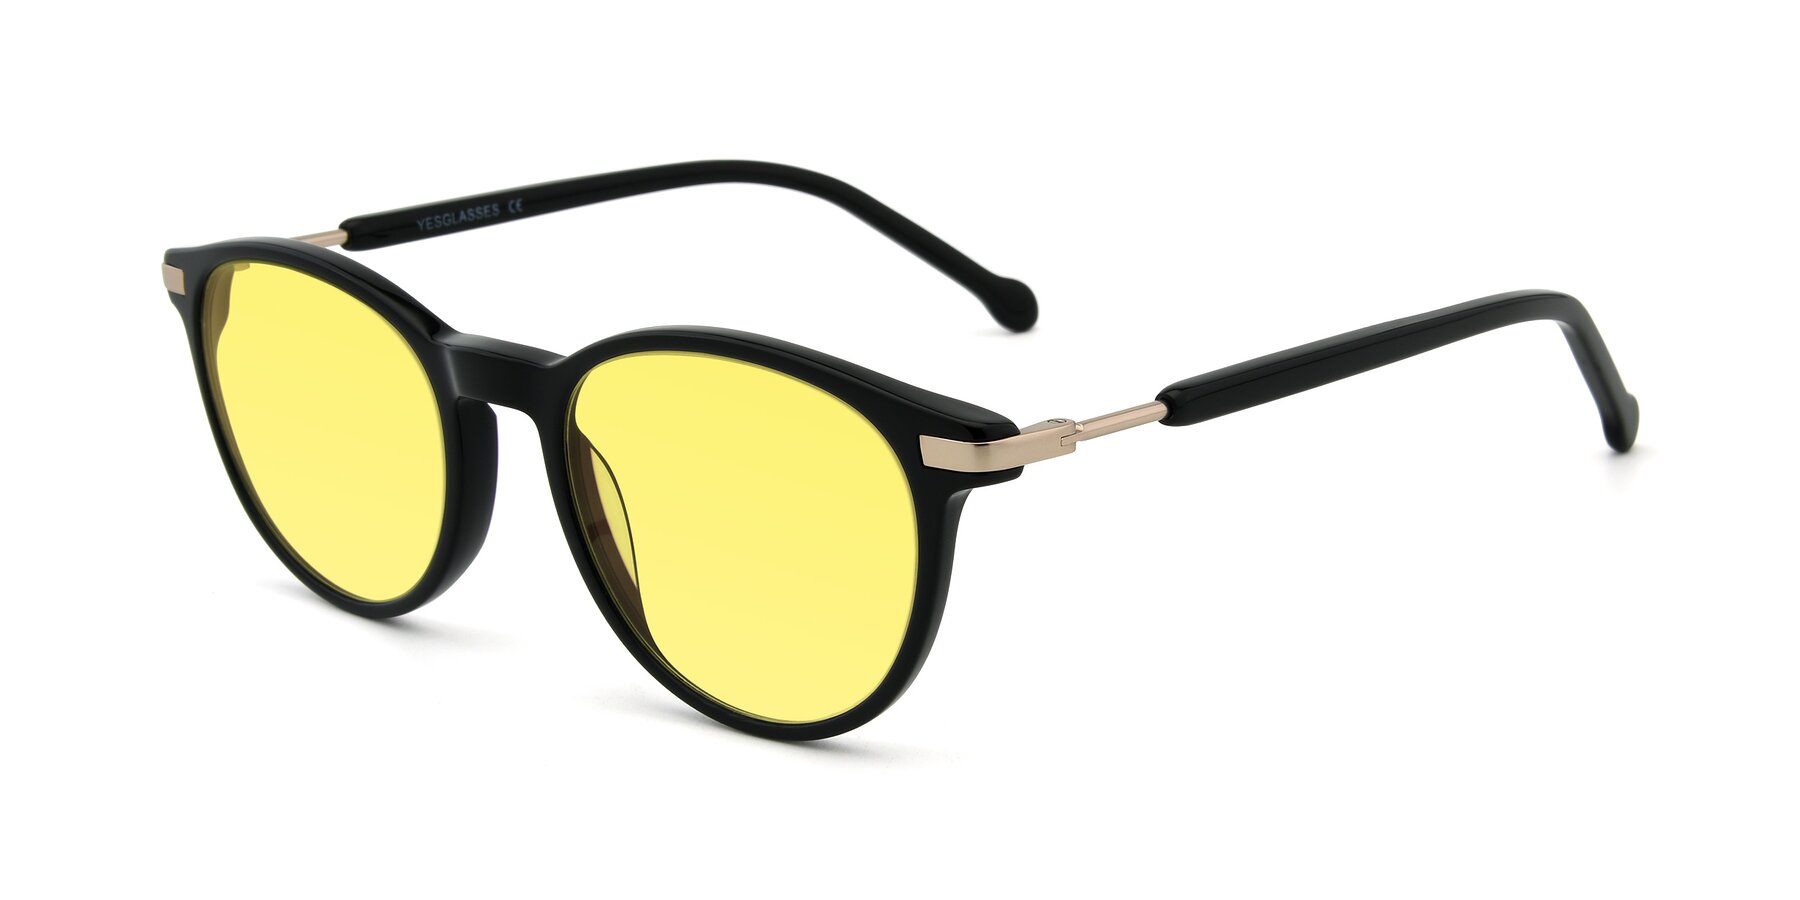 Angle of 17429 in Black with Medium Yellow Tinted Lenses